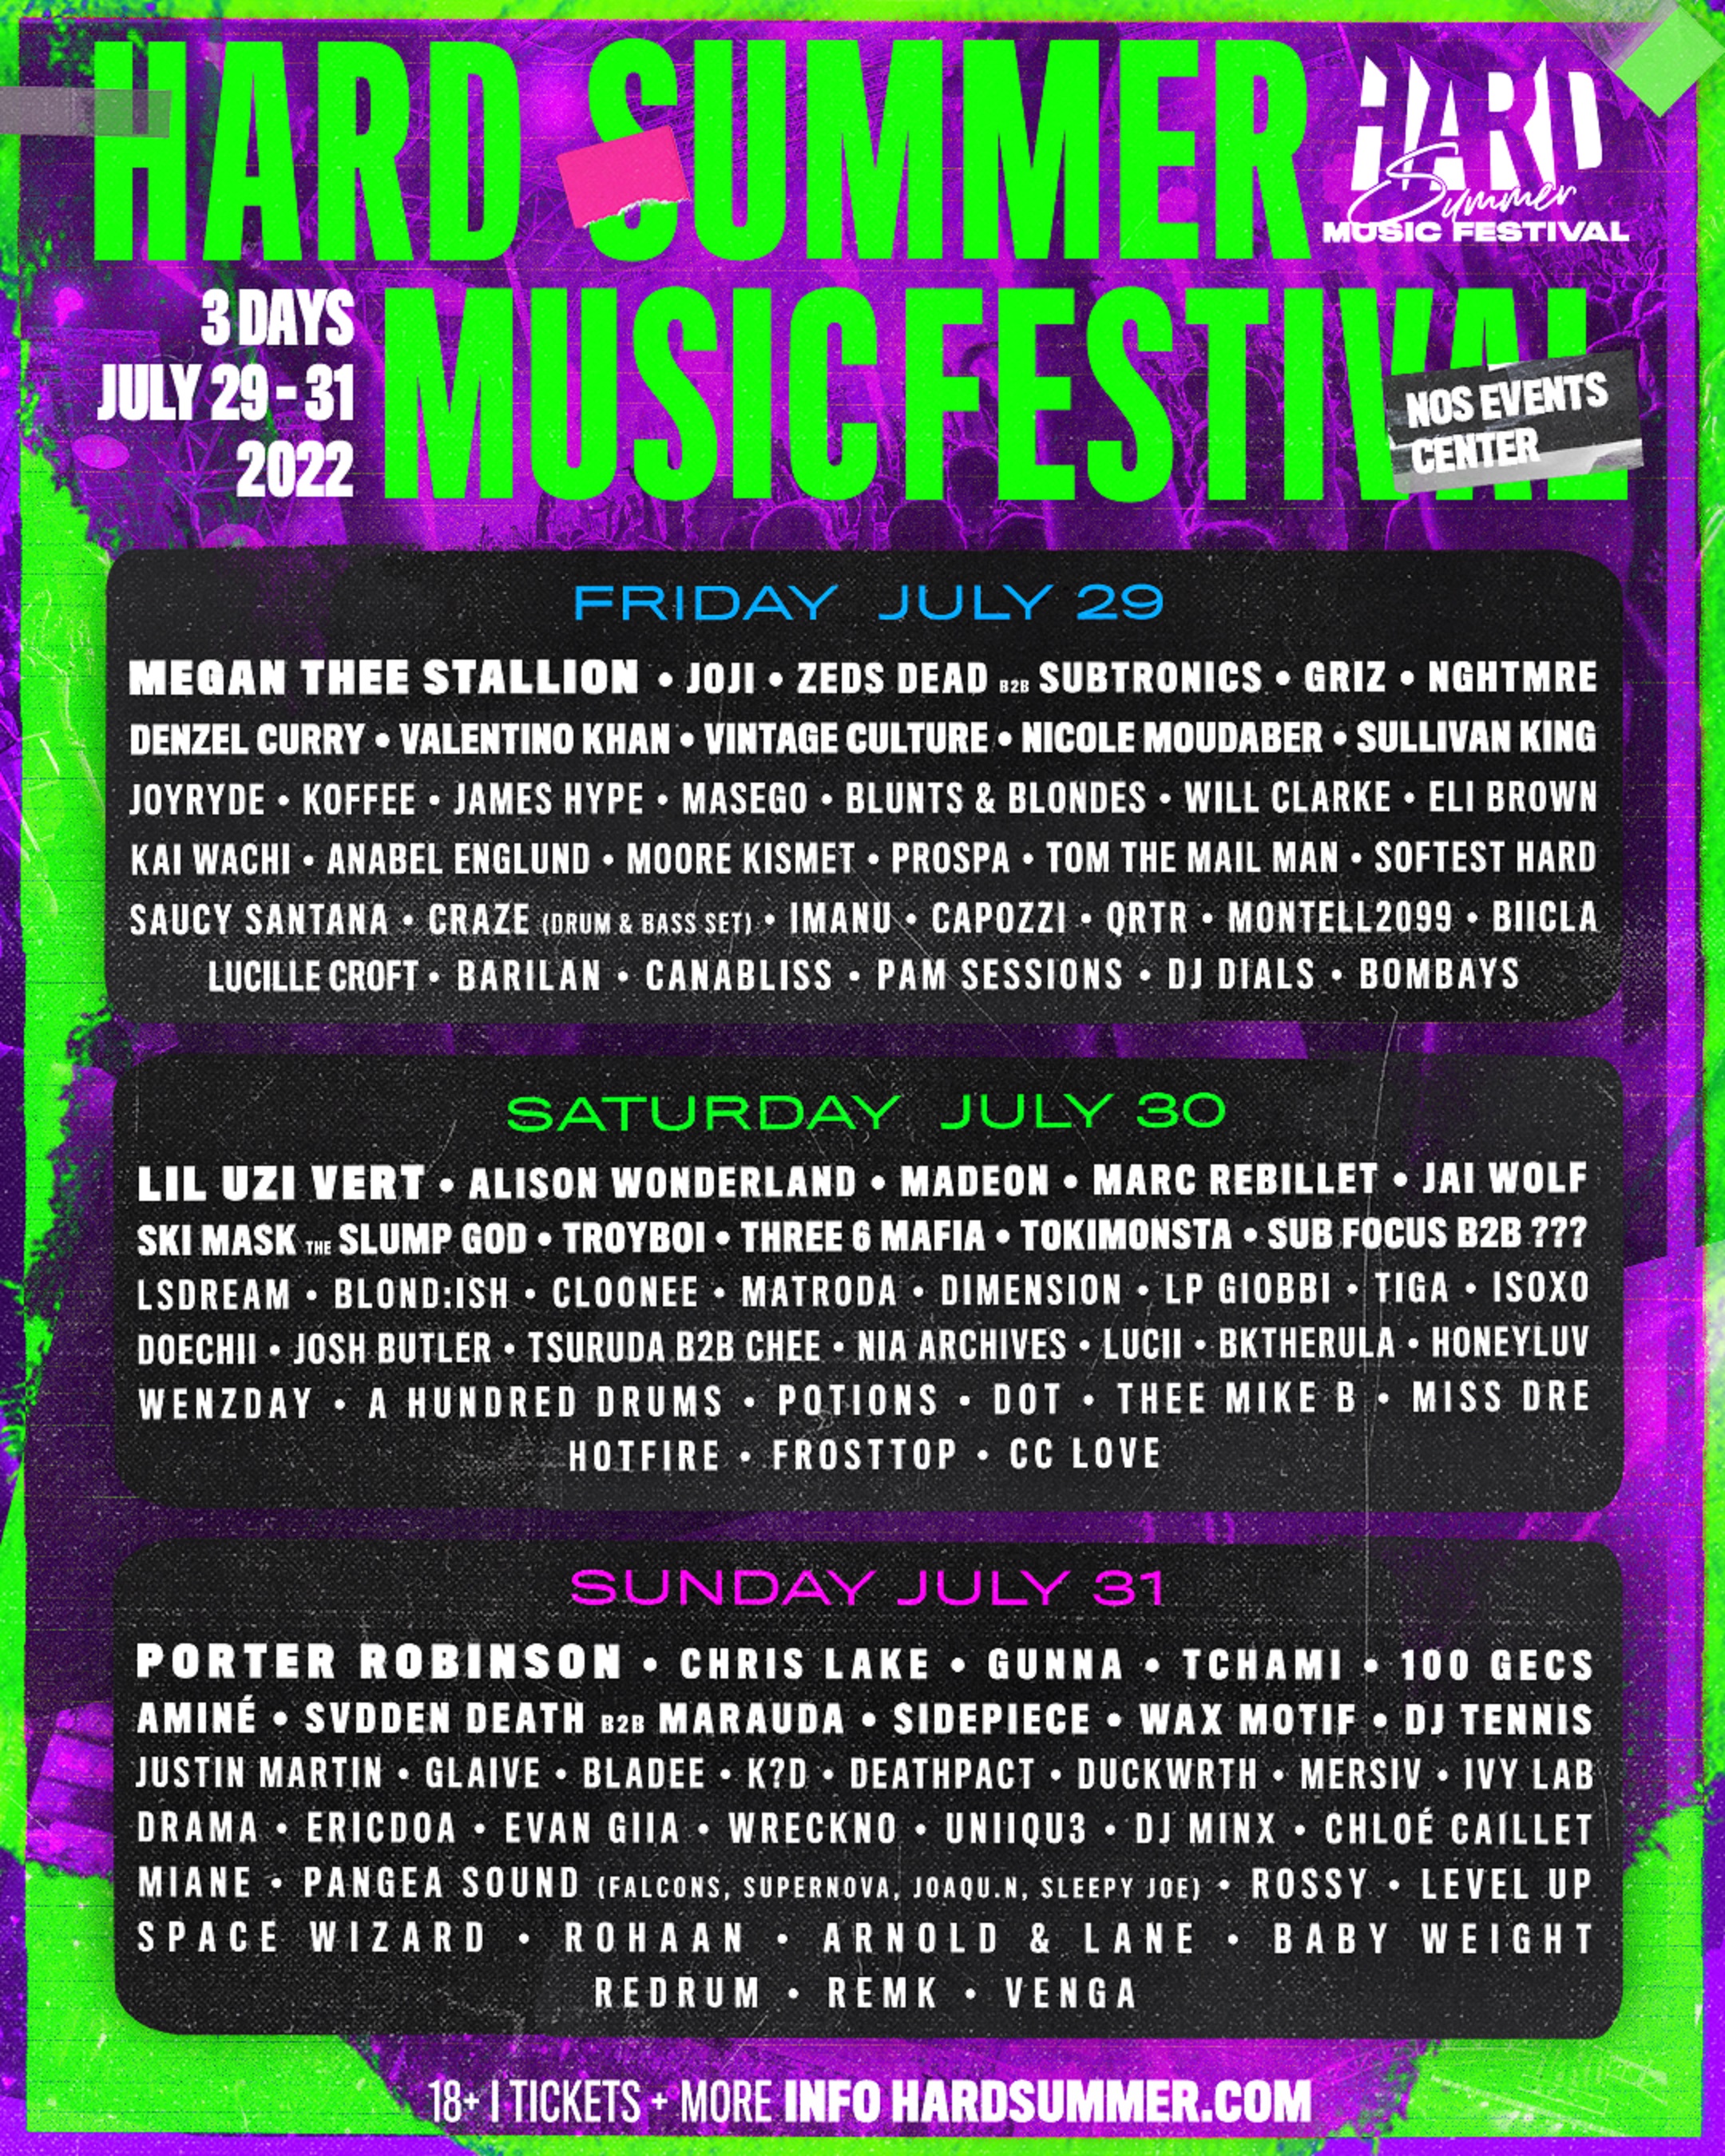 HARD Events Announces Lineup for HARD Summer Music Festival 2022